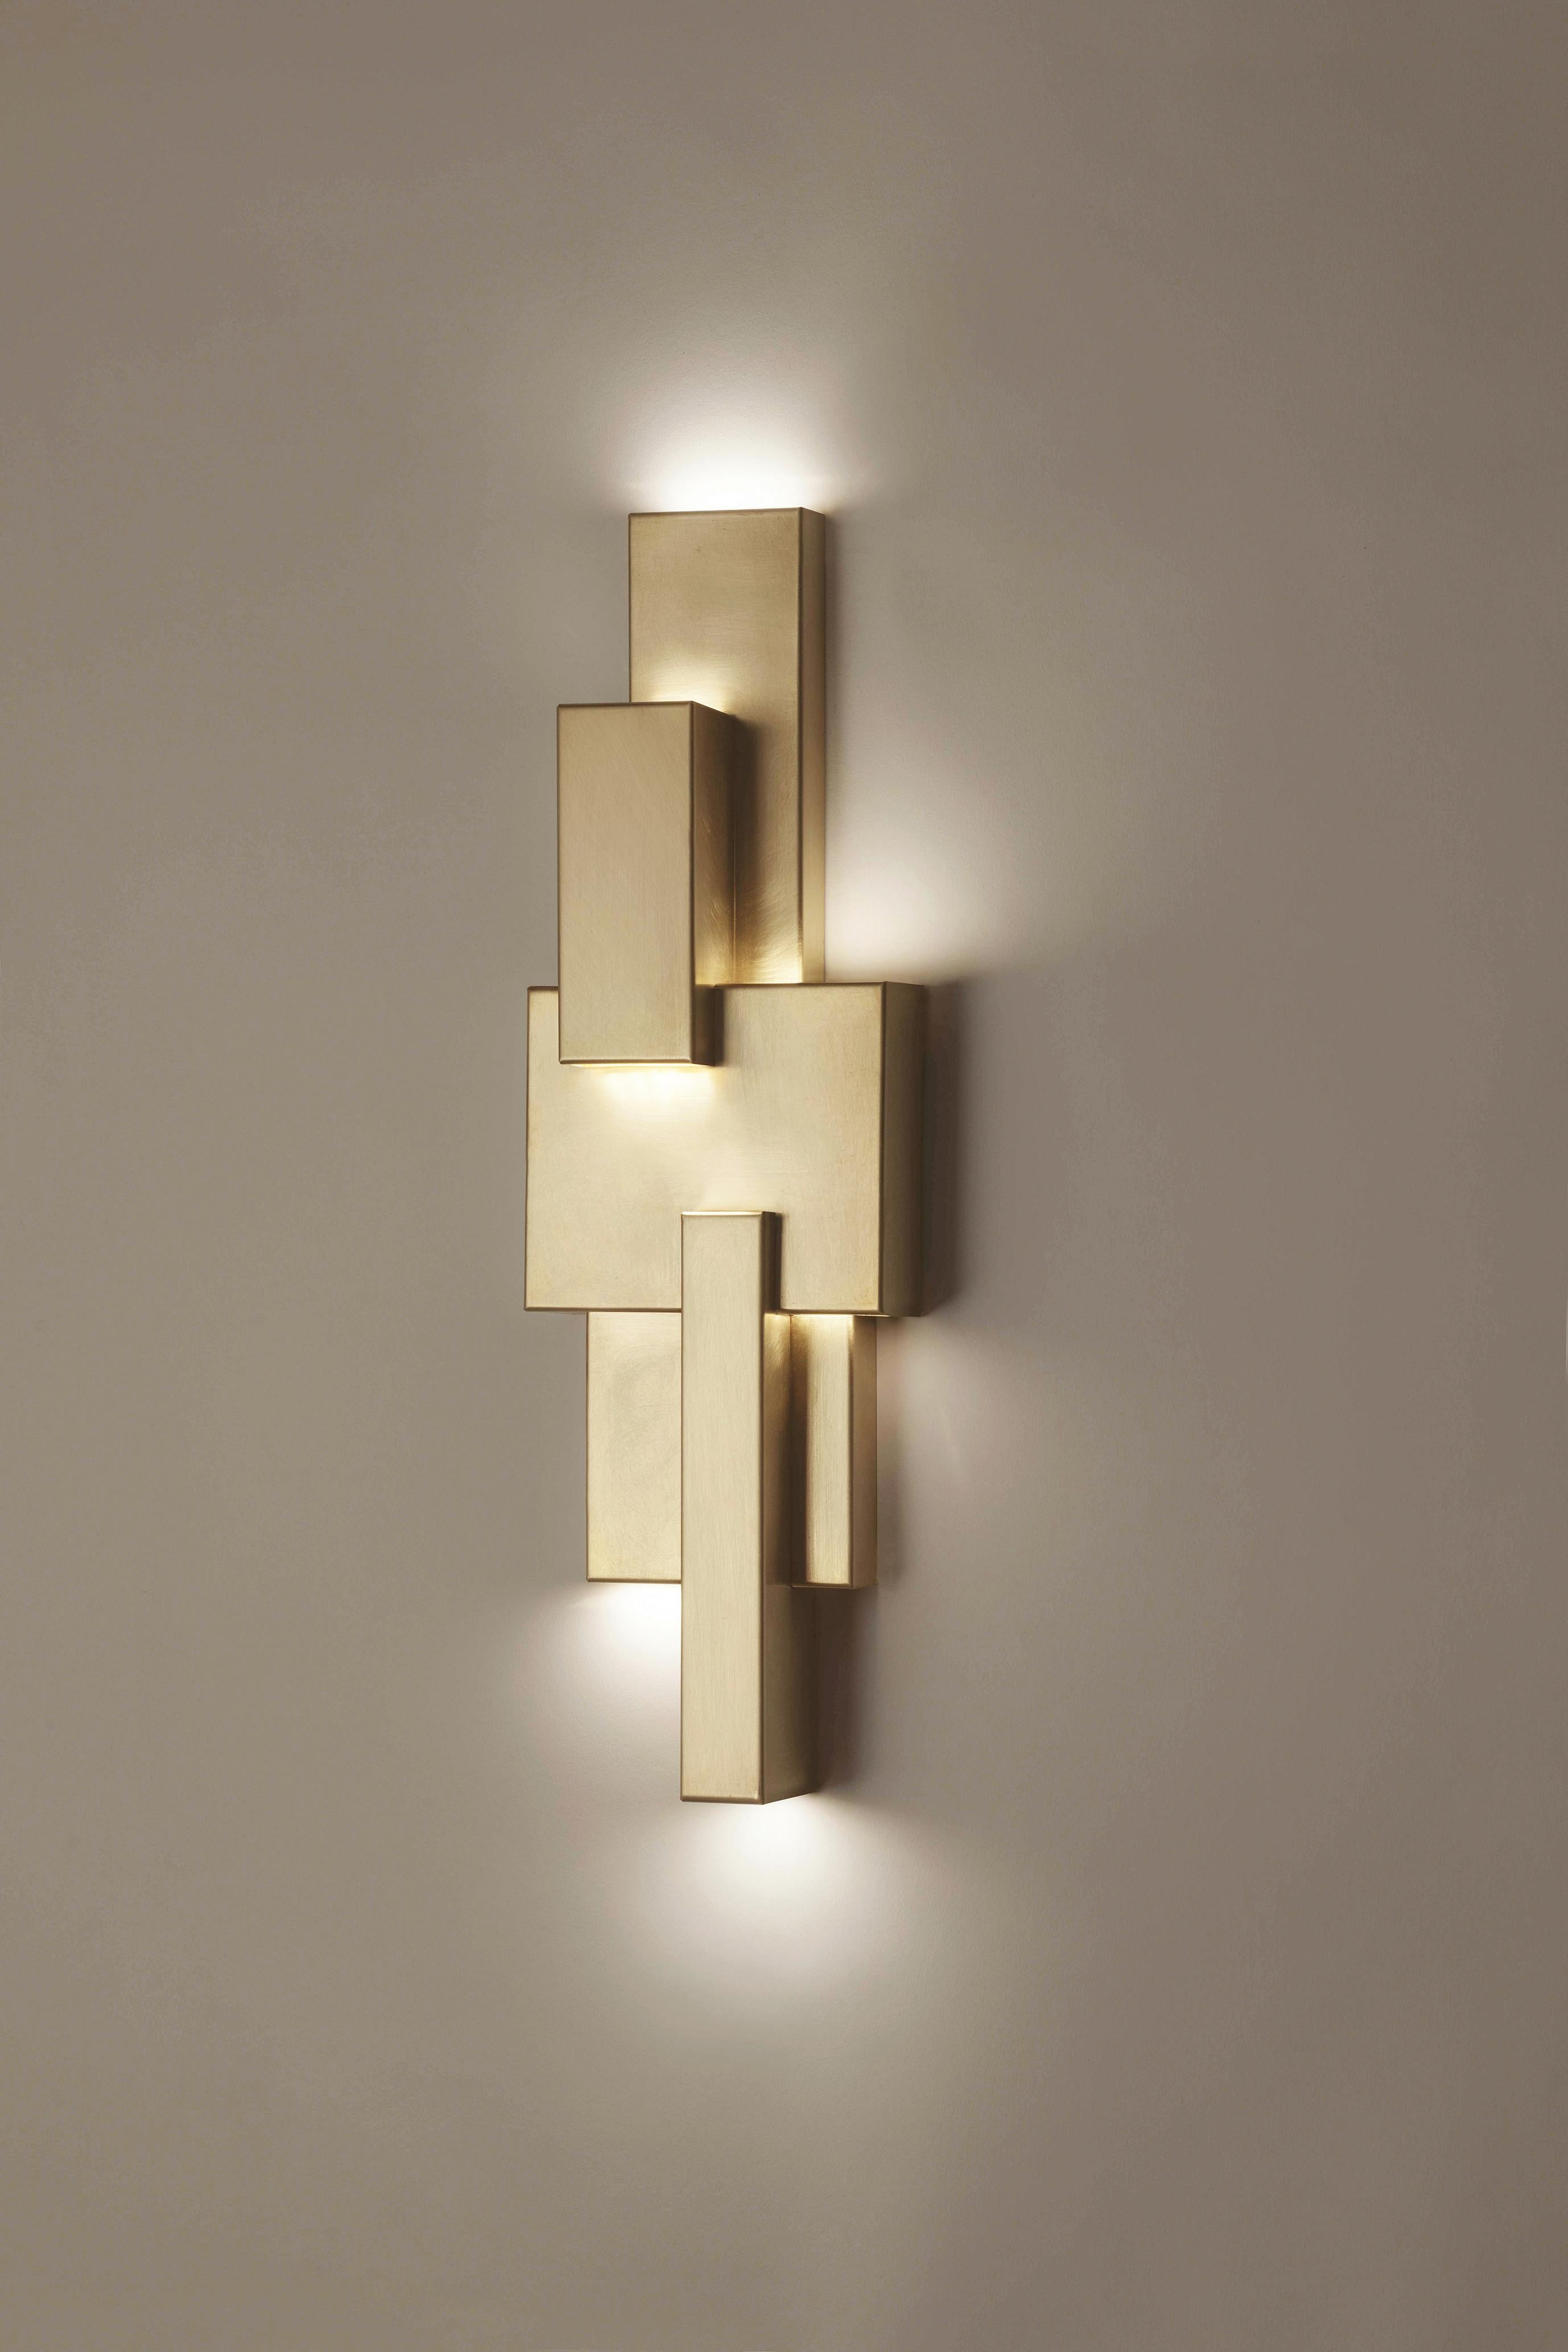 Mallet by Eric de Dormael, Galerie Negropontes in Paris, France - Sconce composed of brass and LED 

Éric de Dormael is an unconventional artist, his trajectory far from the beaten track. Trained at the Saint-Luc school in Tournai and at the Atelier